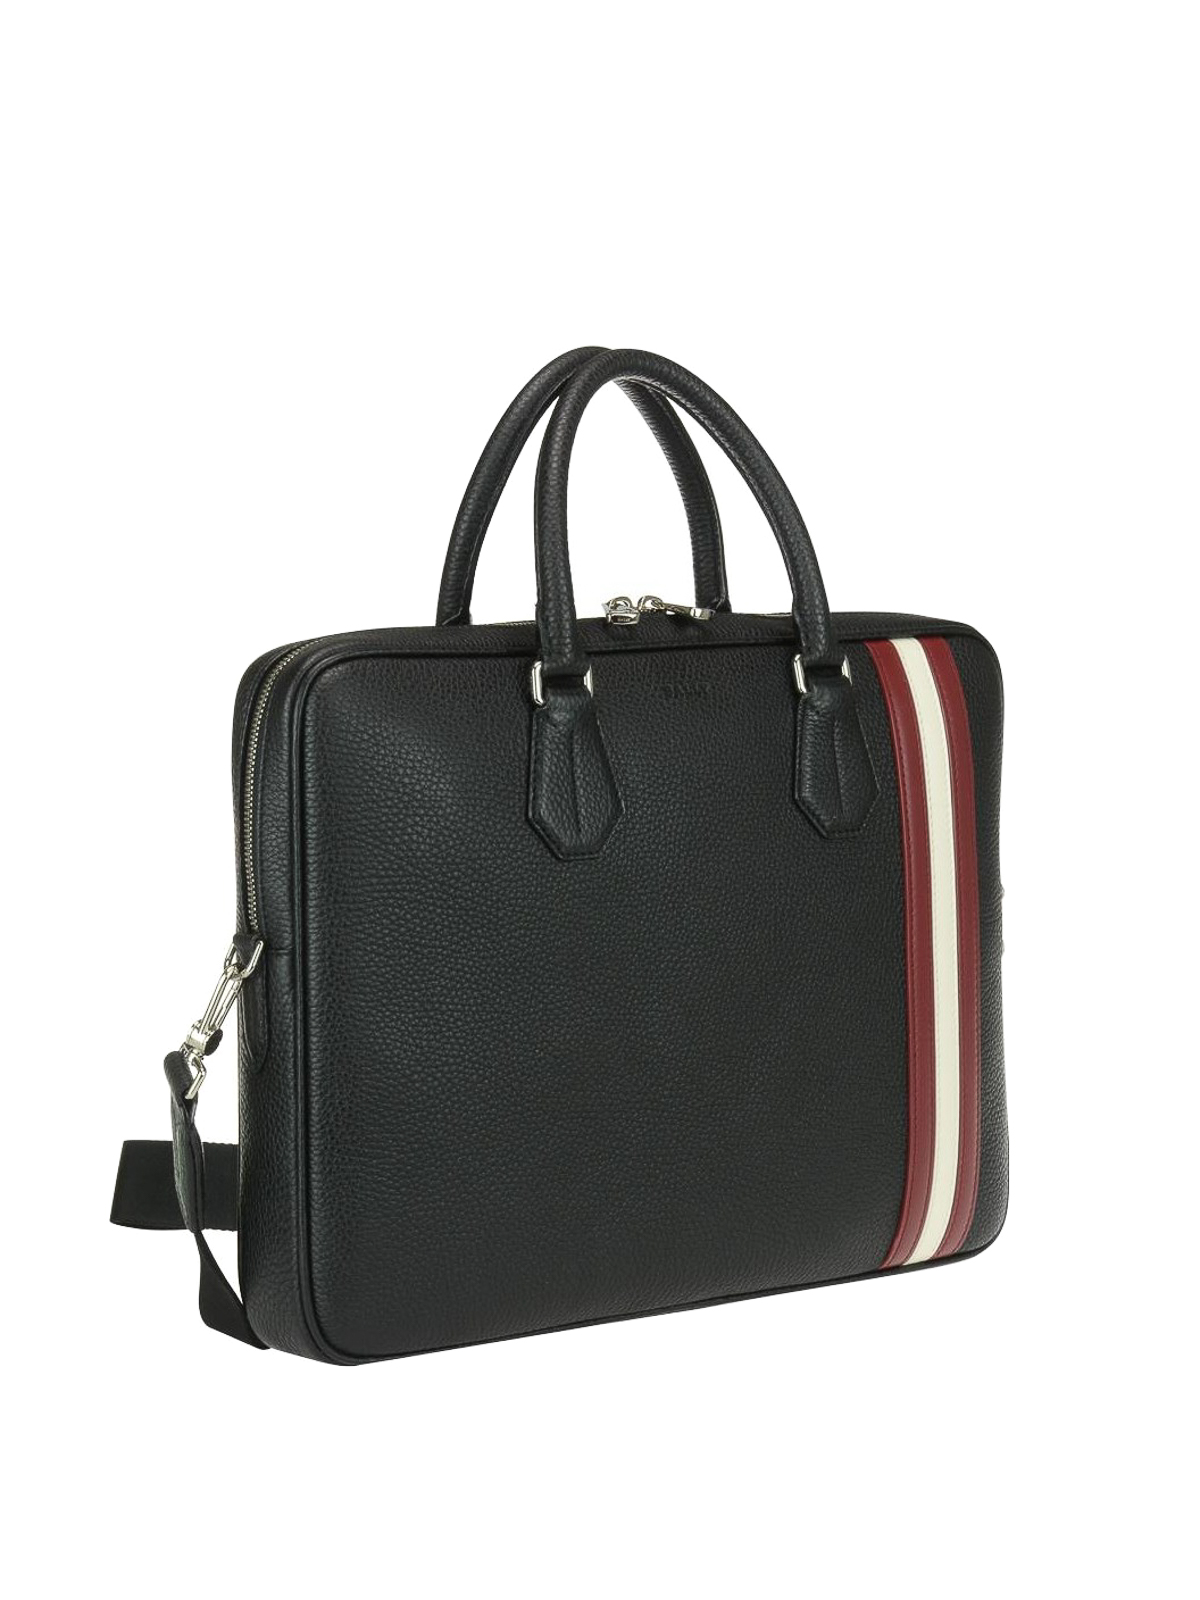 Laptop bags & briefcases Bally - Staz black grained leather briefcase ...